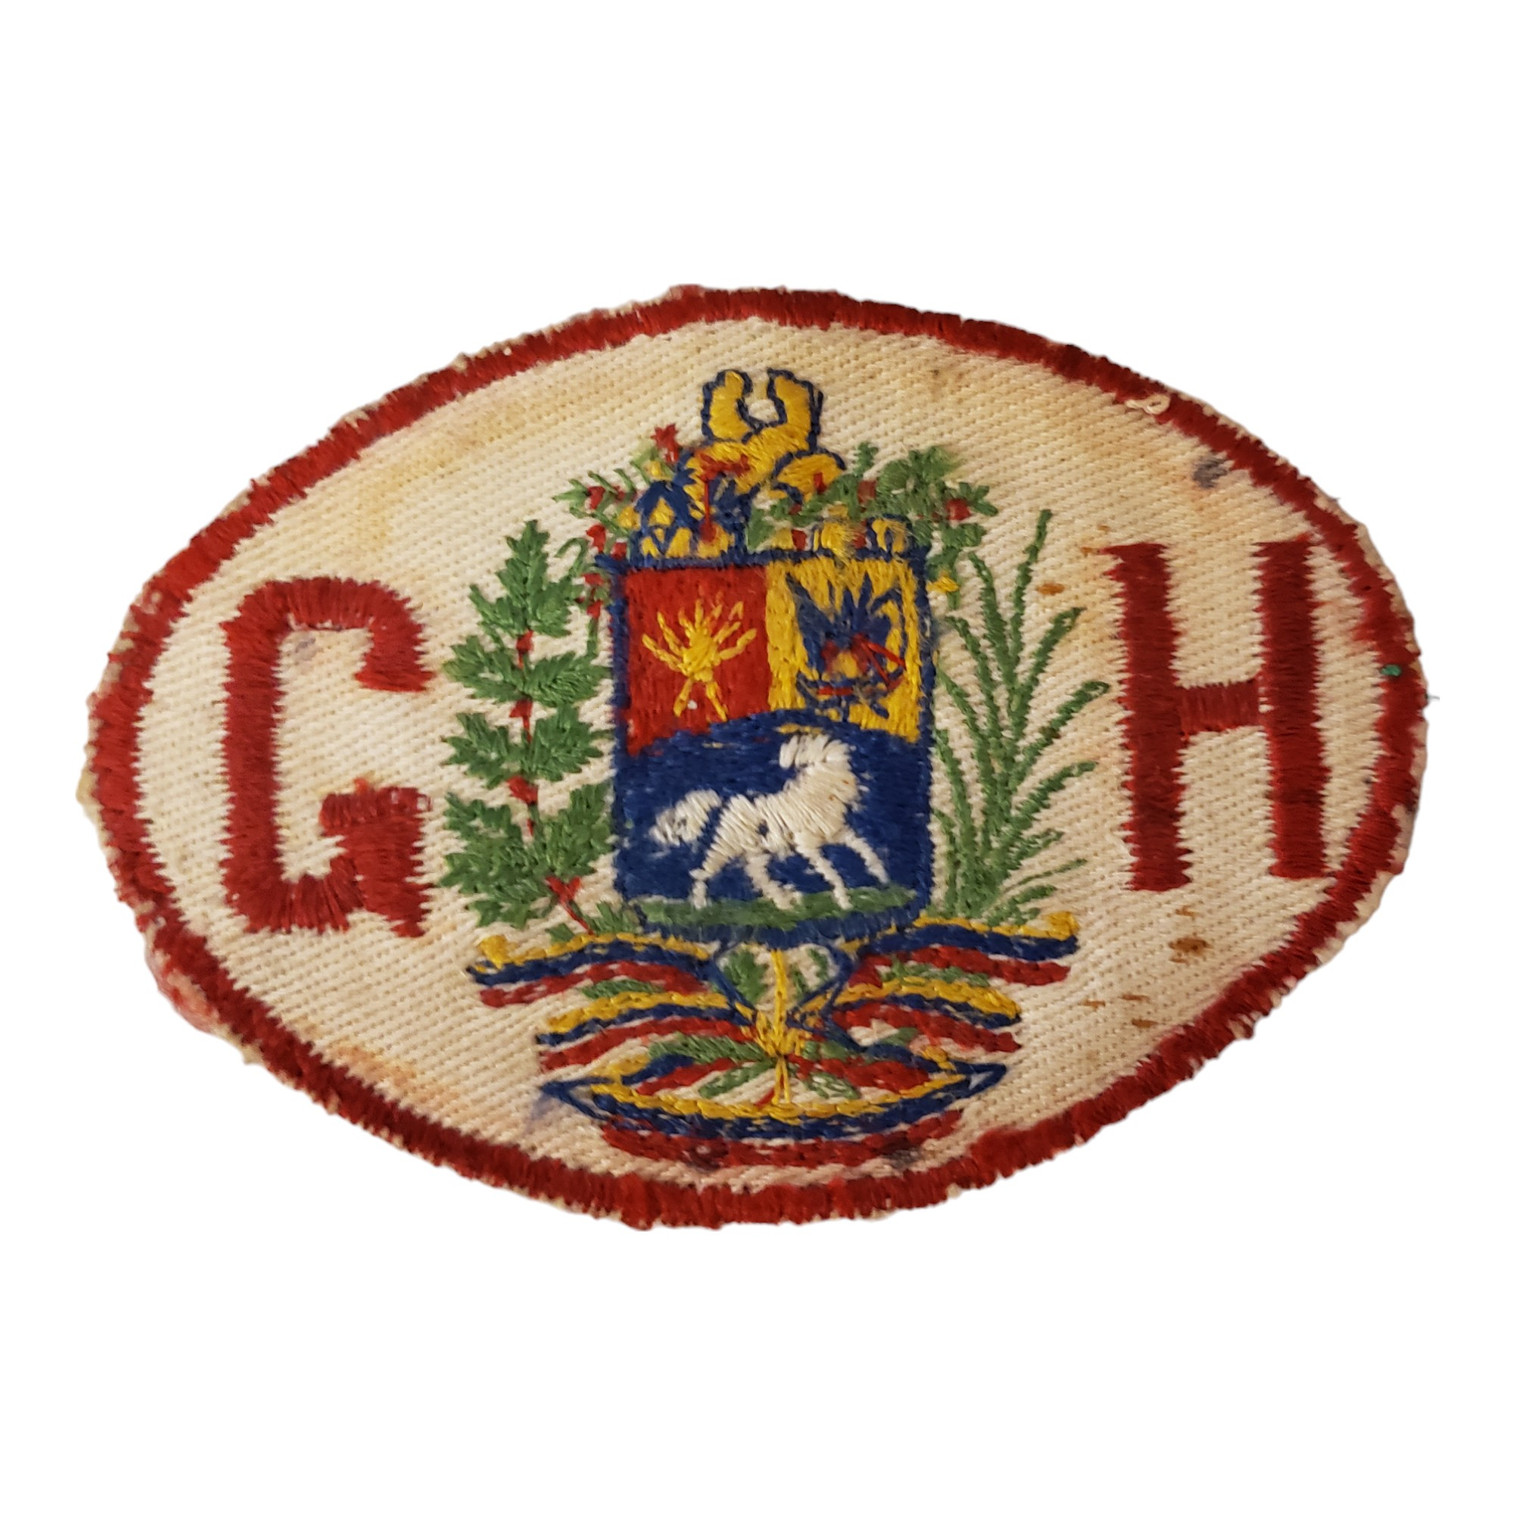 Bolivian Armed Forces Honor Guard Sleeve Patch